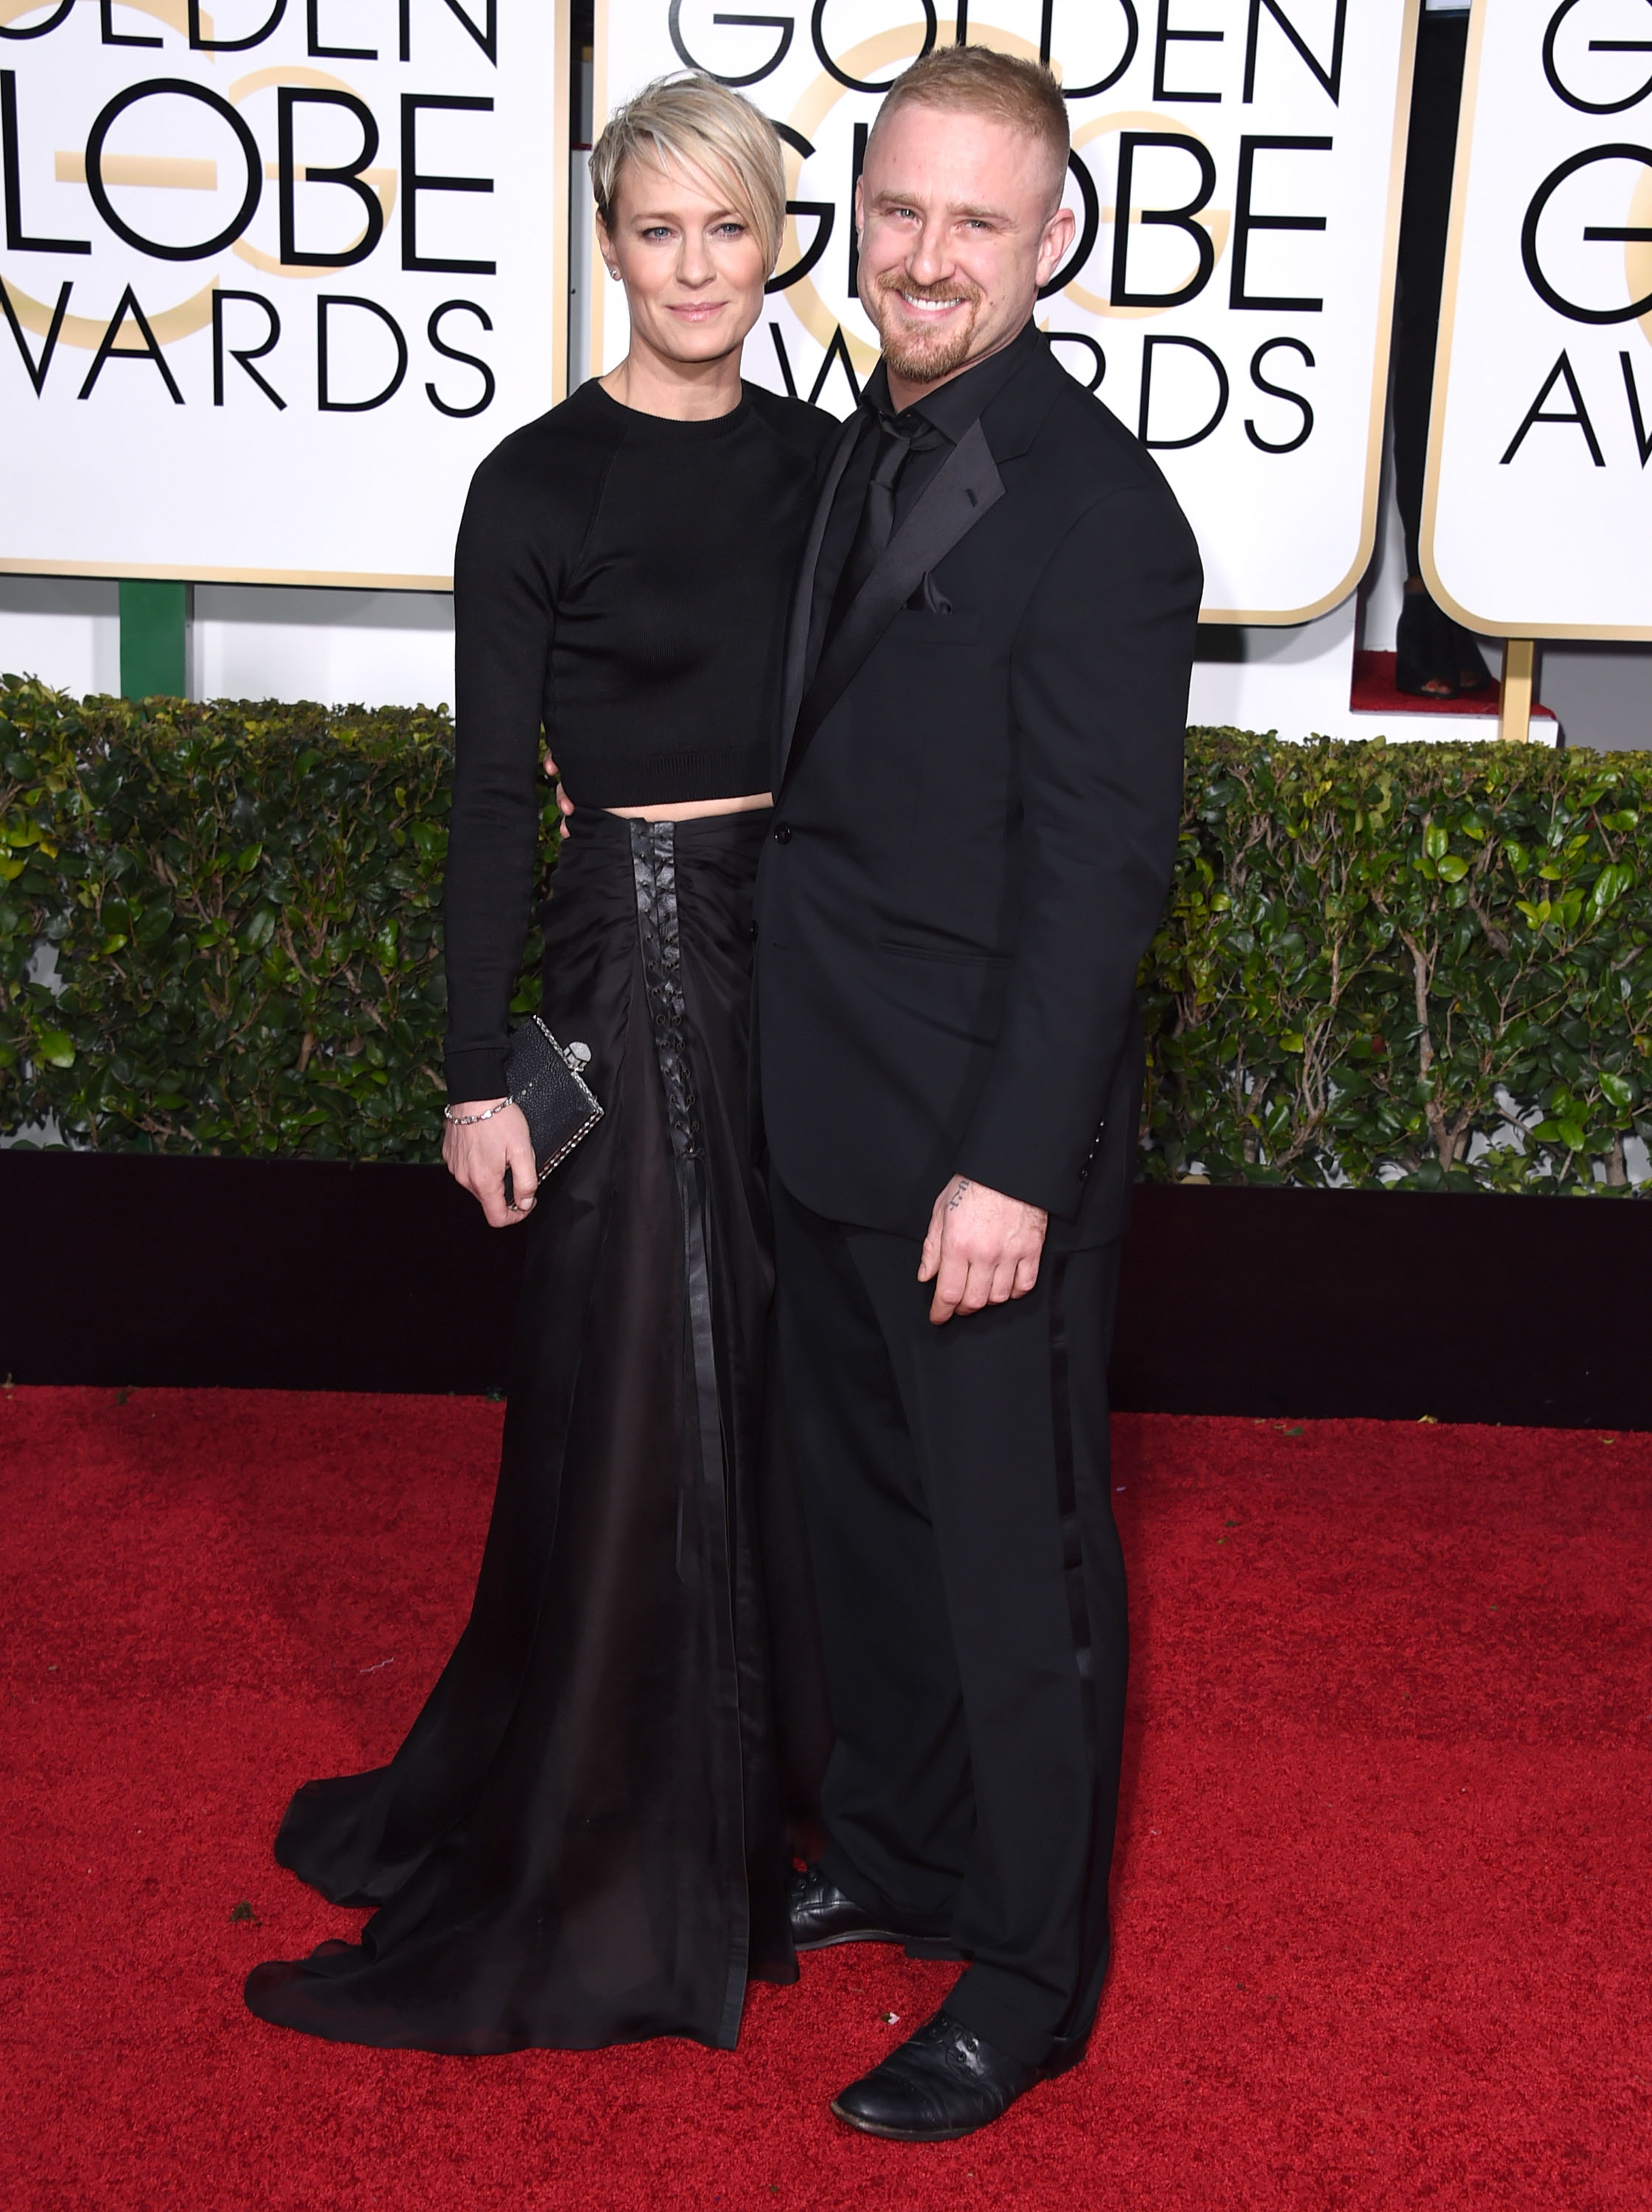 Robin Wright and Ben Foster arrives at the 72nd Annual Golden Globe Awards at The Beverly Hilton Hotel on January 11, 2015, in Beverly Hills, California.| Source: Getty Images